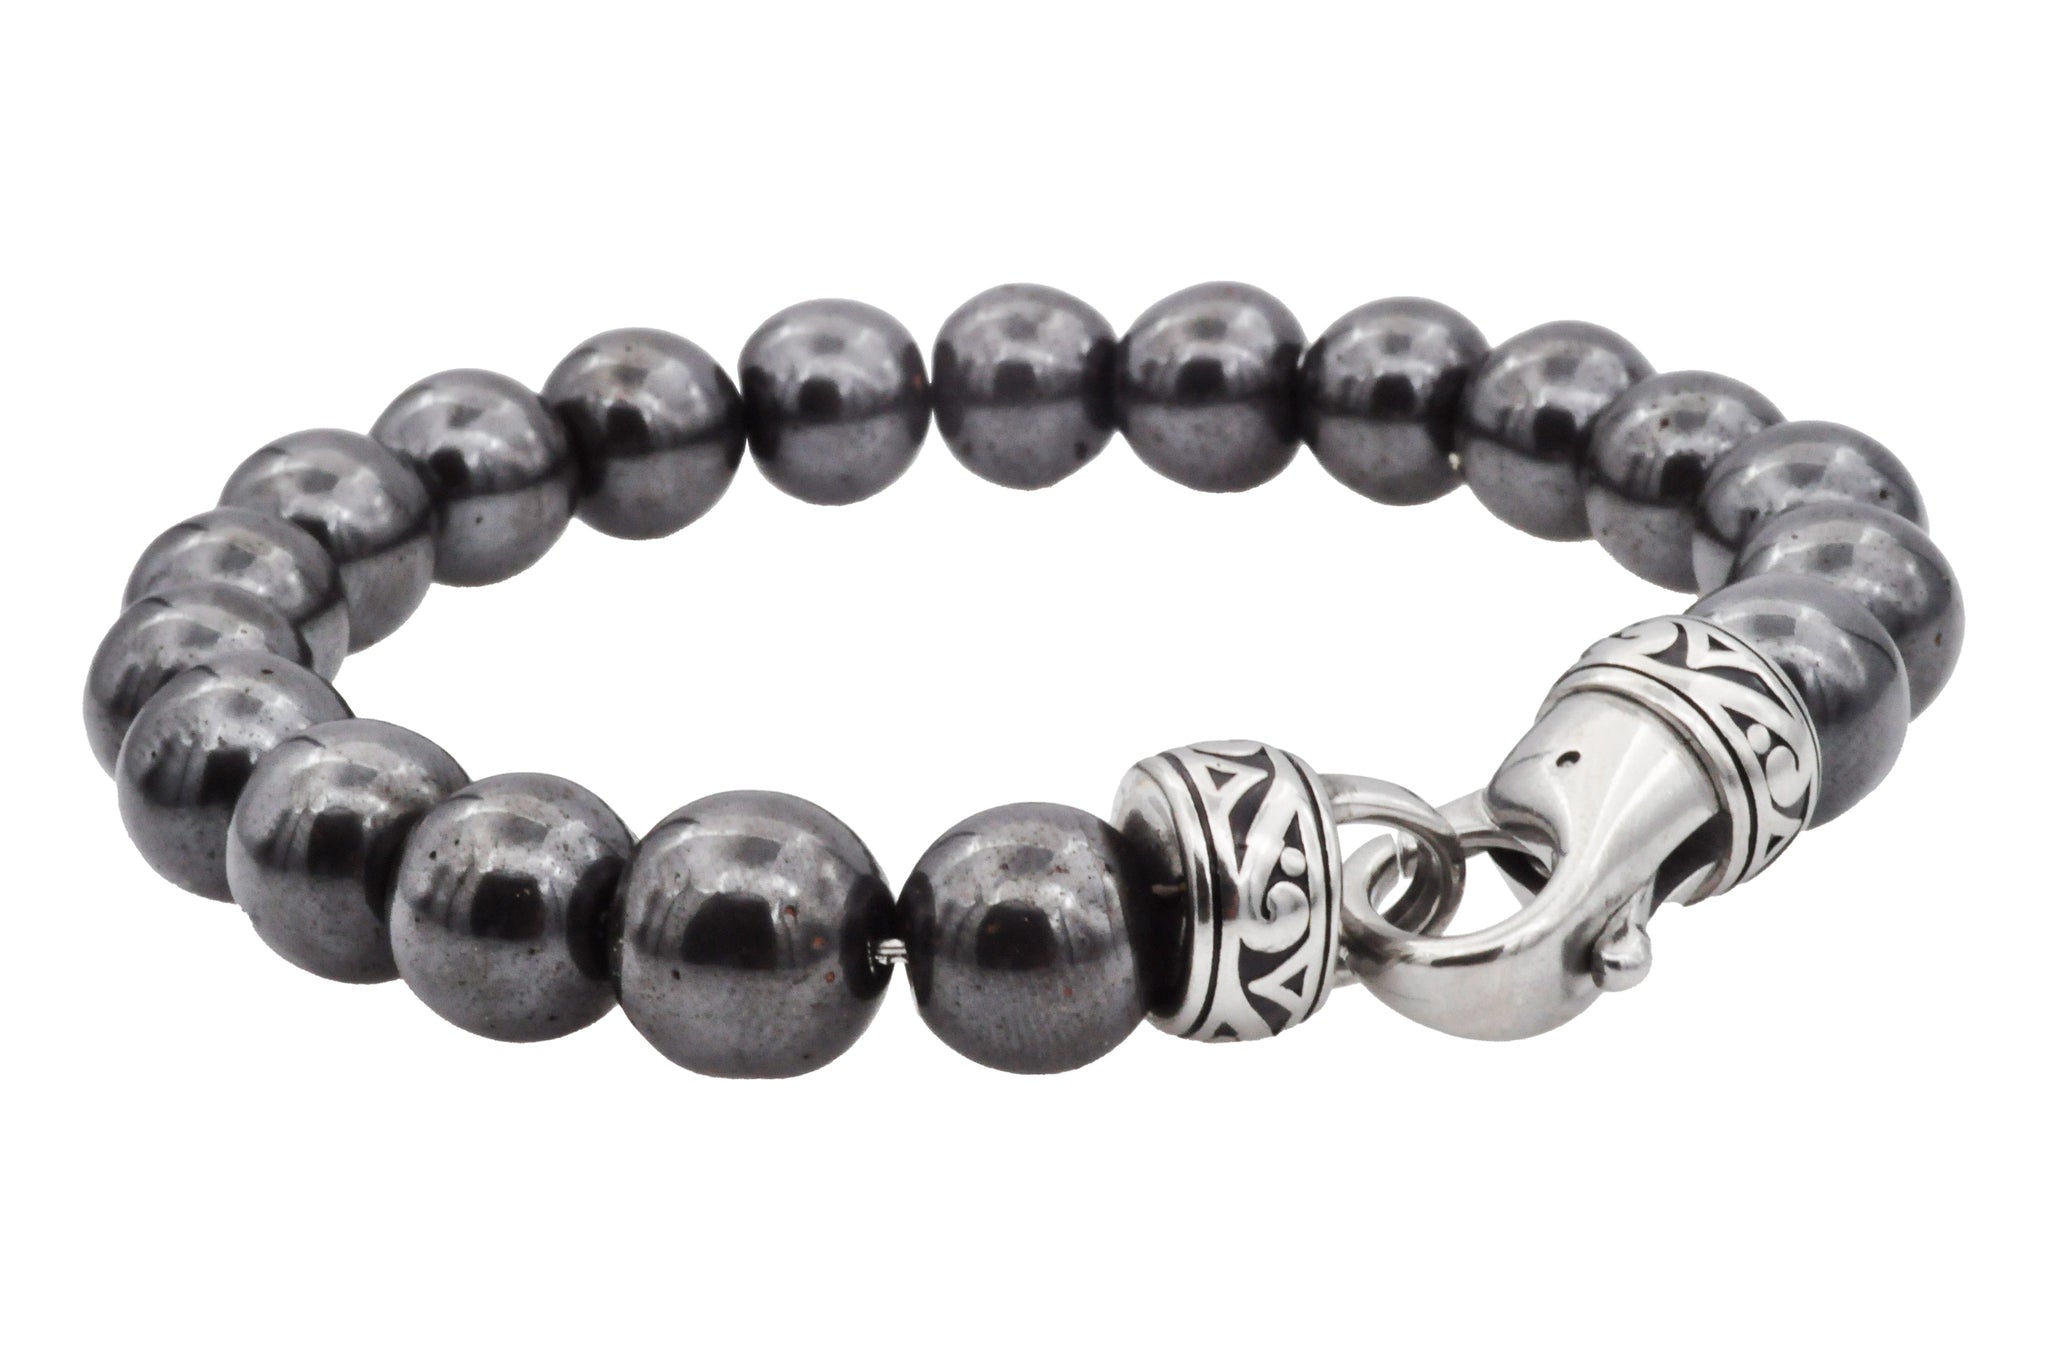 Buy Hematite Bracelet, Healing Crystals and Stones, Bracelets for Women,  Beaded Bracelets, Crystal Bracelet, Healing Bracelet, Crystals,highly  protective energy,willpower,logical thought processes, at Amazon.in